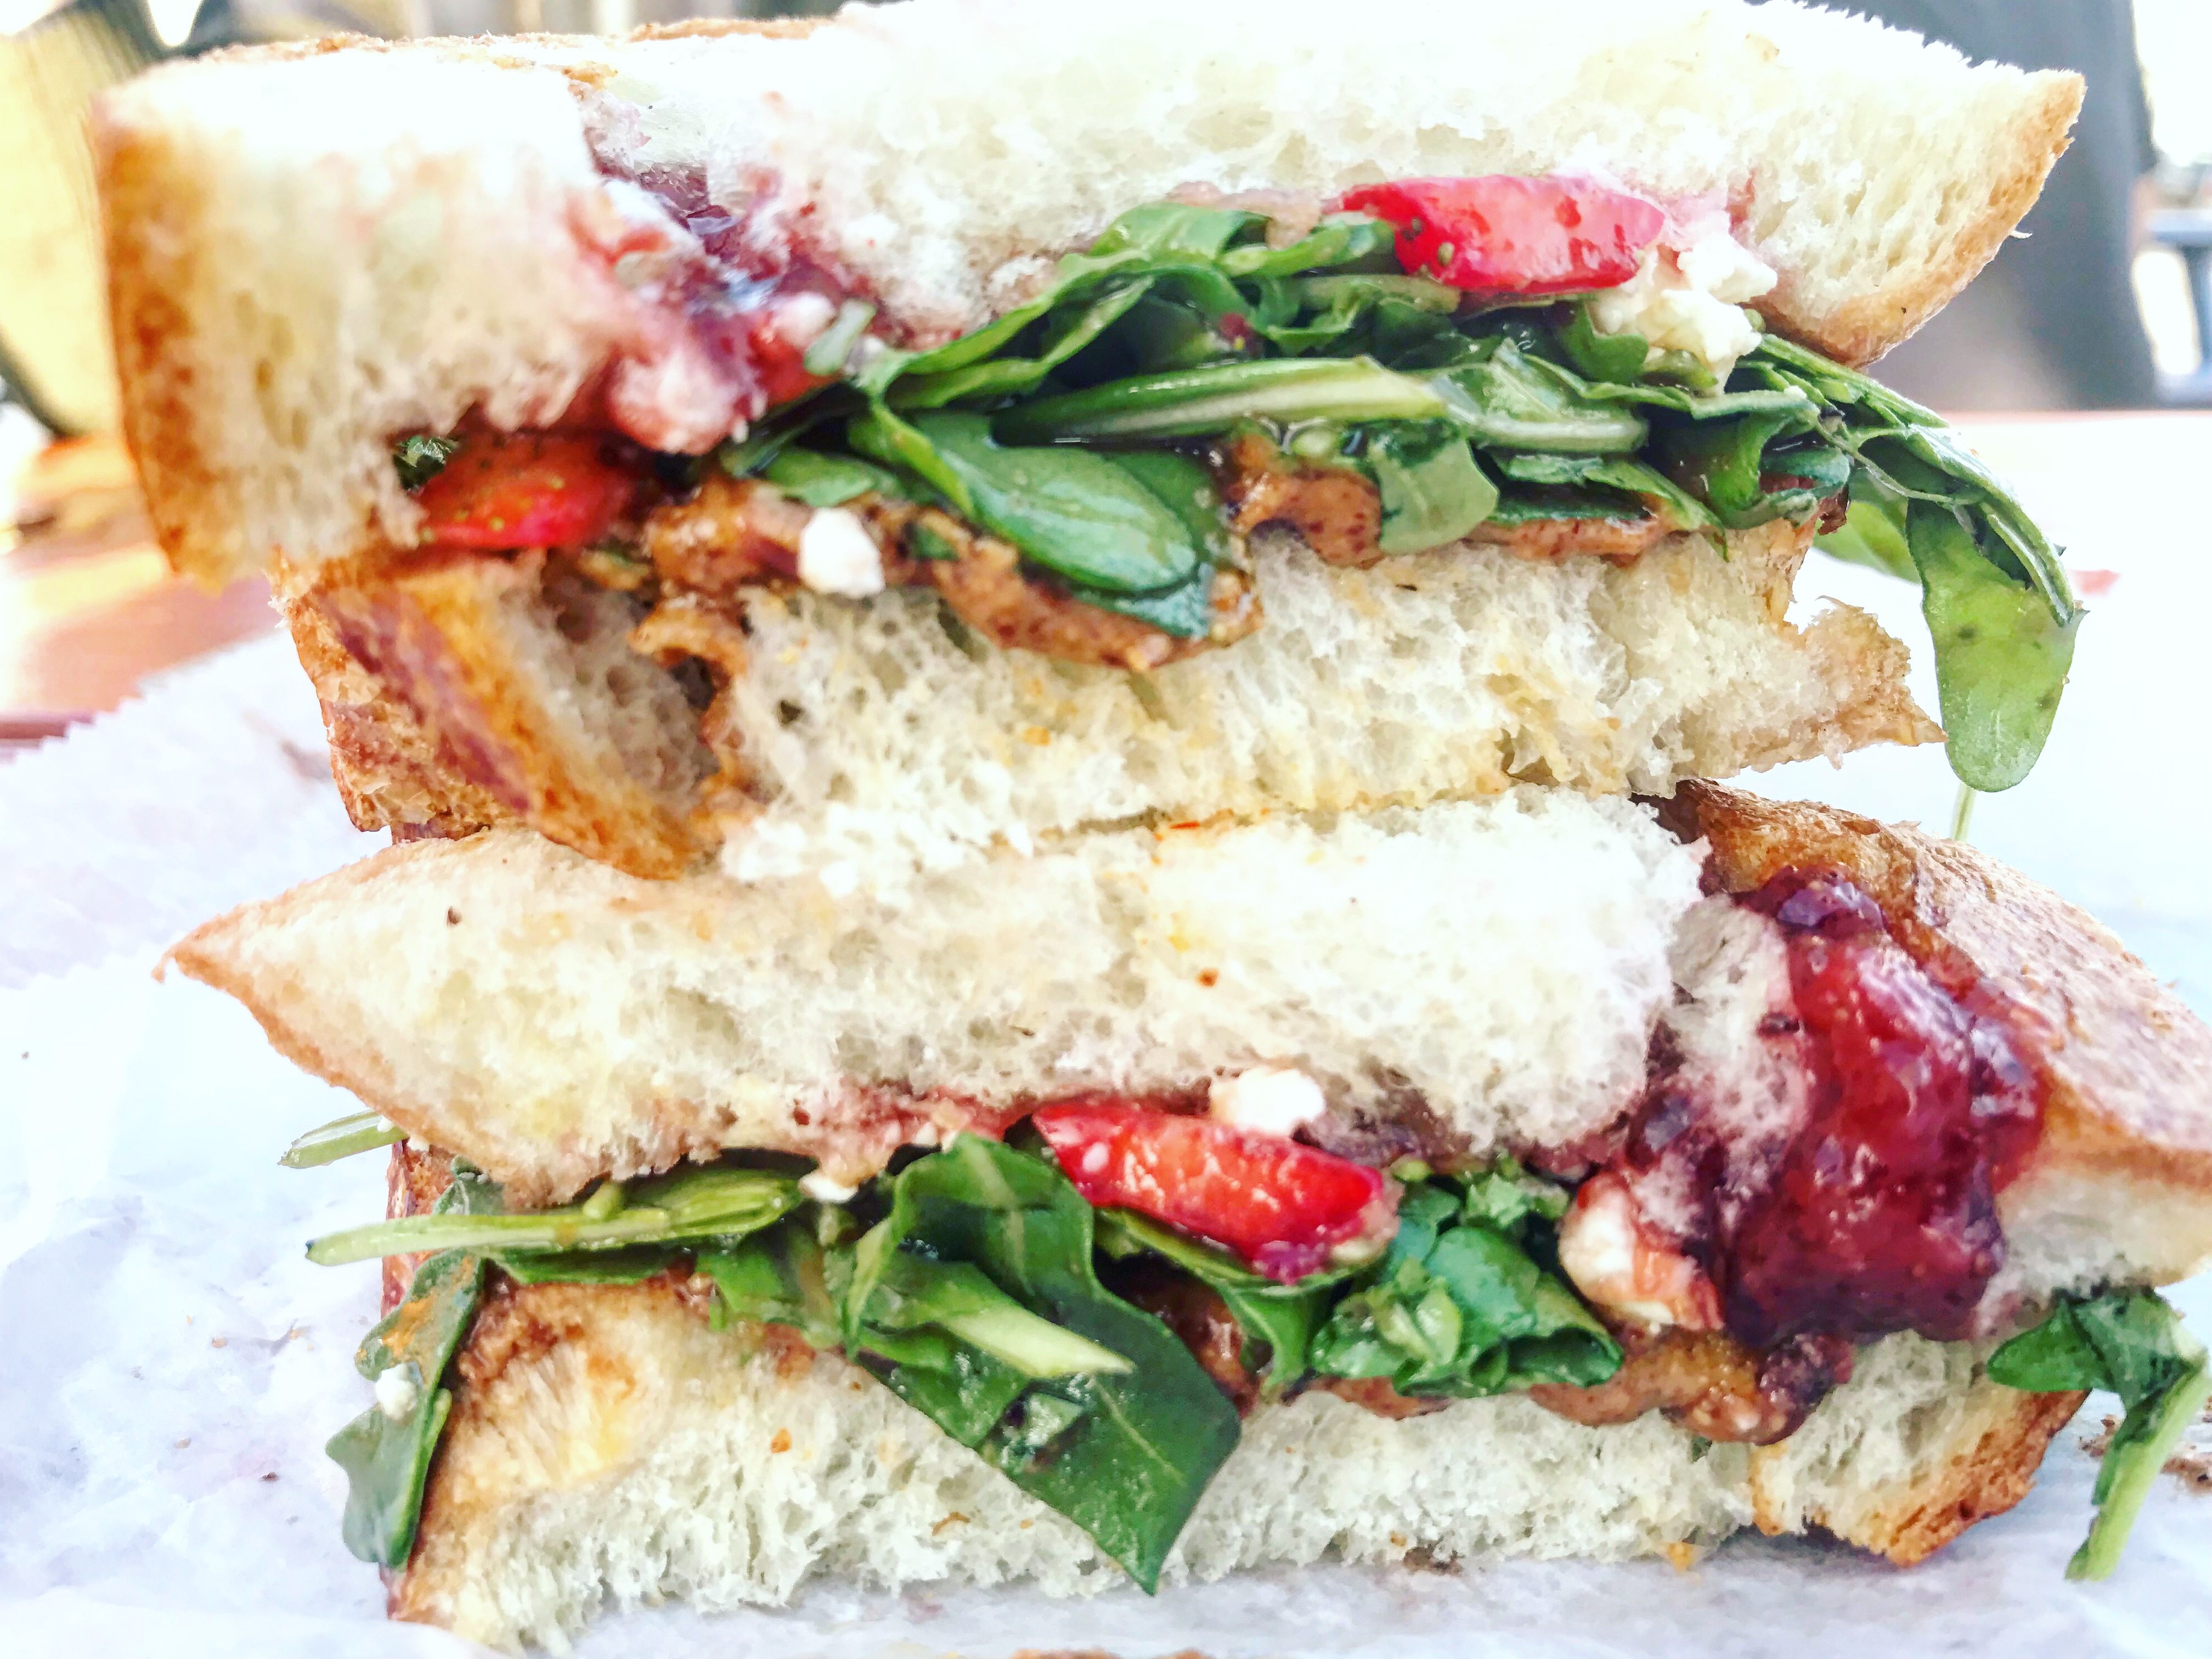 Strawberry Fields, a Current Special: Strawberry Preserves, Almond Nut Butter, BLaby Arugula, Dijon Vinaigrette, Feta Cheese and Sliced Strawberries